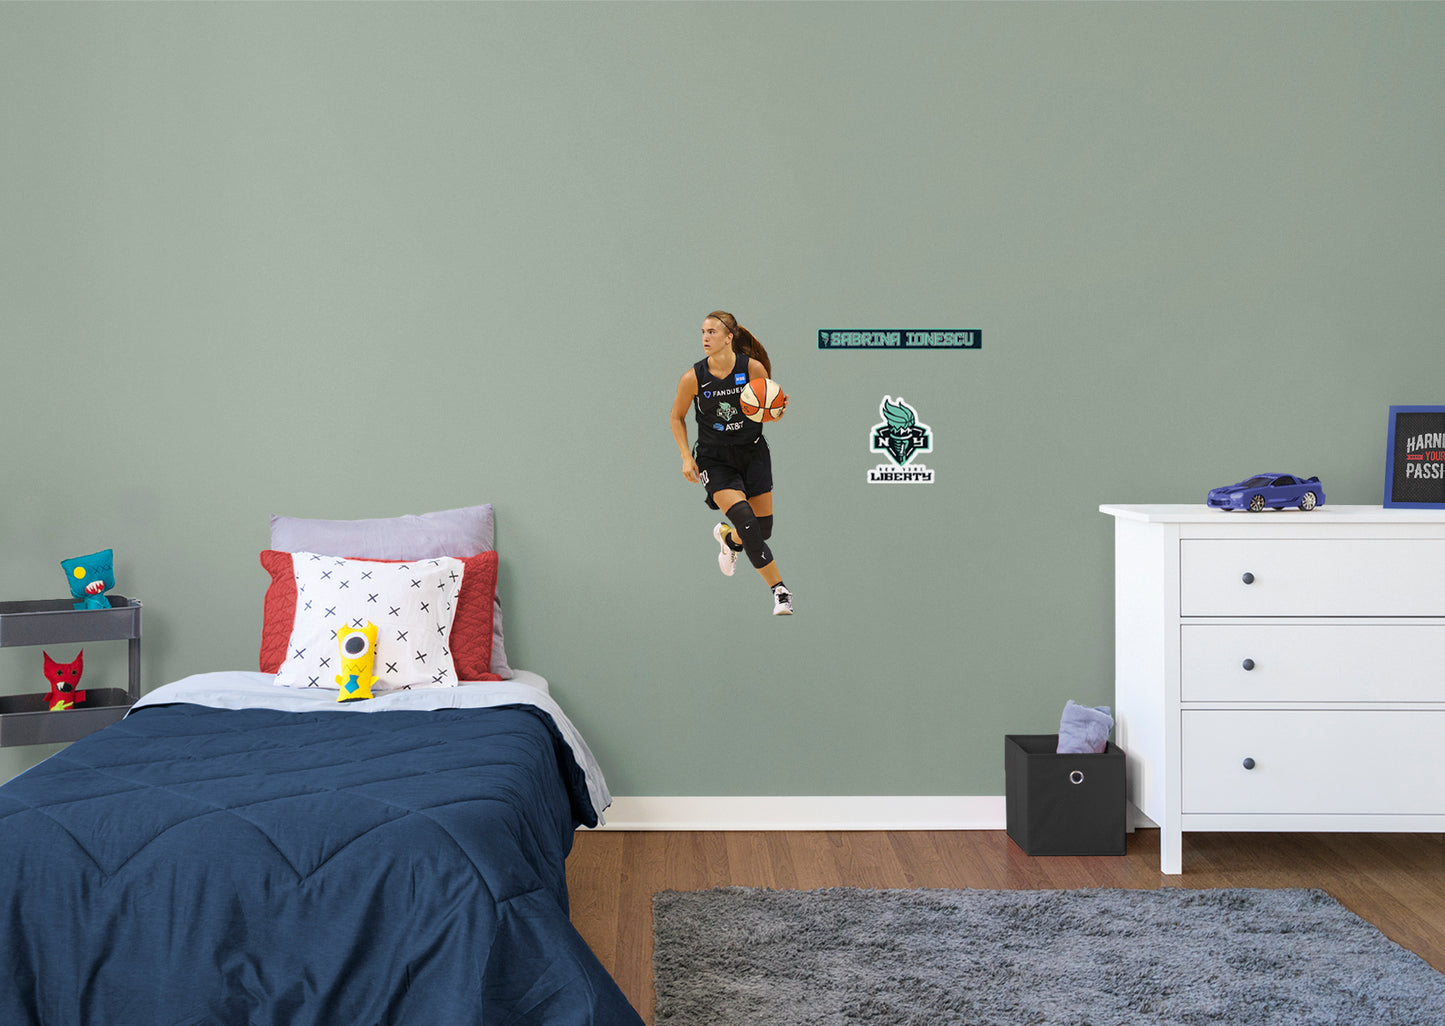 New York Liberty: Sabrina Ionescu         - Officially Licensed WNBA Removable Wall   Adhesive Decal